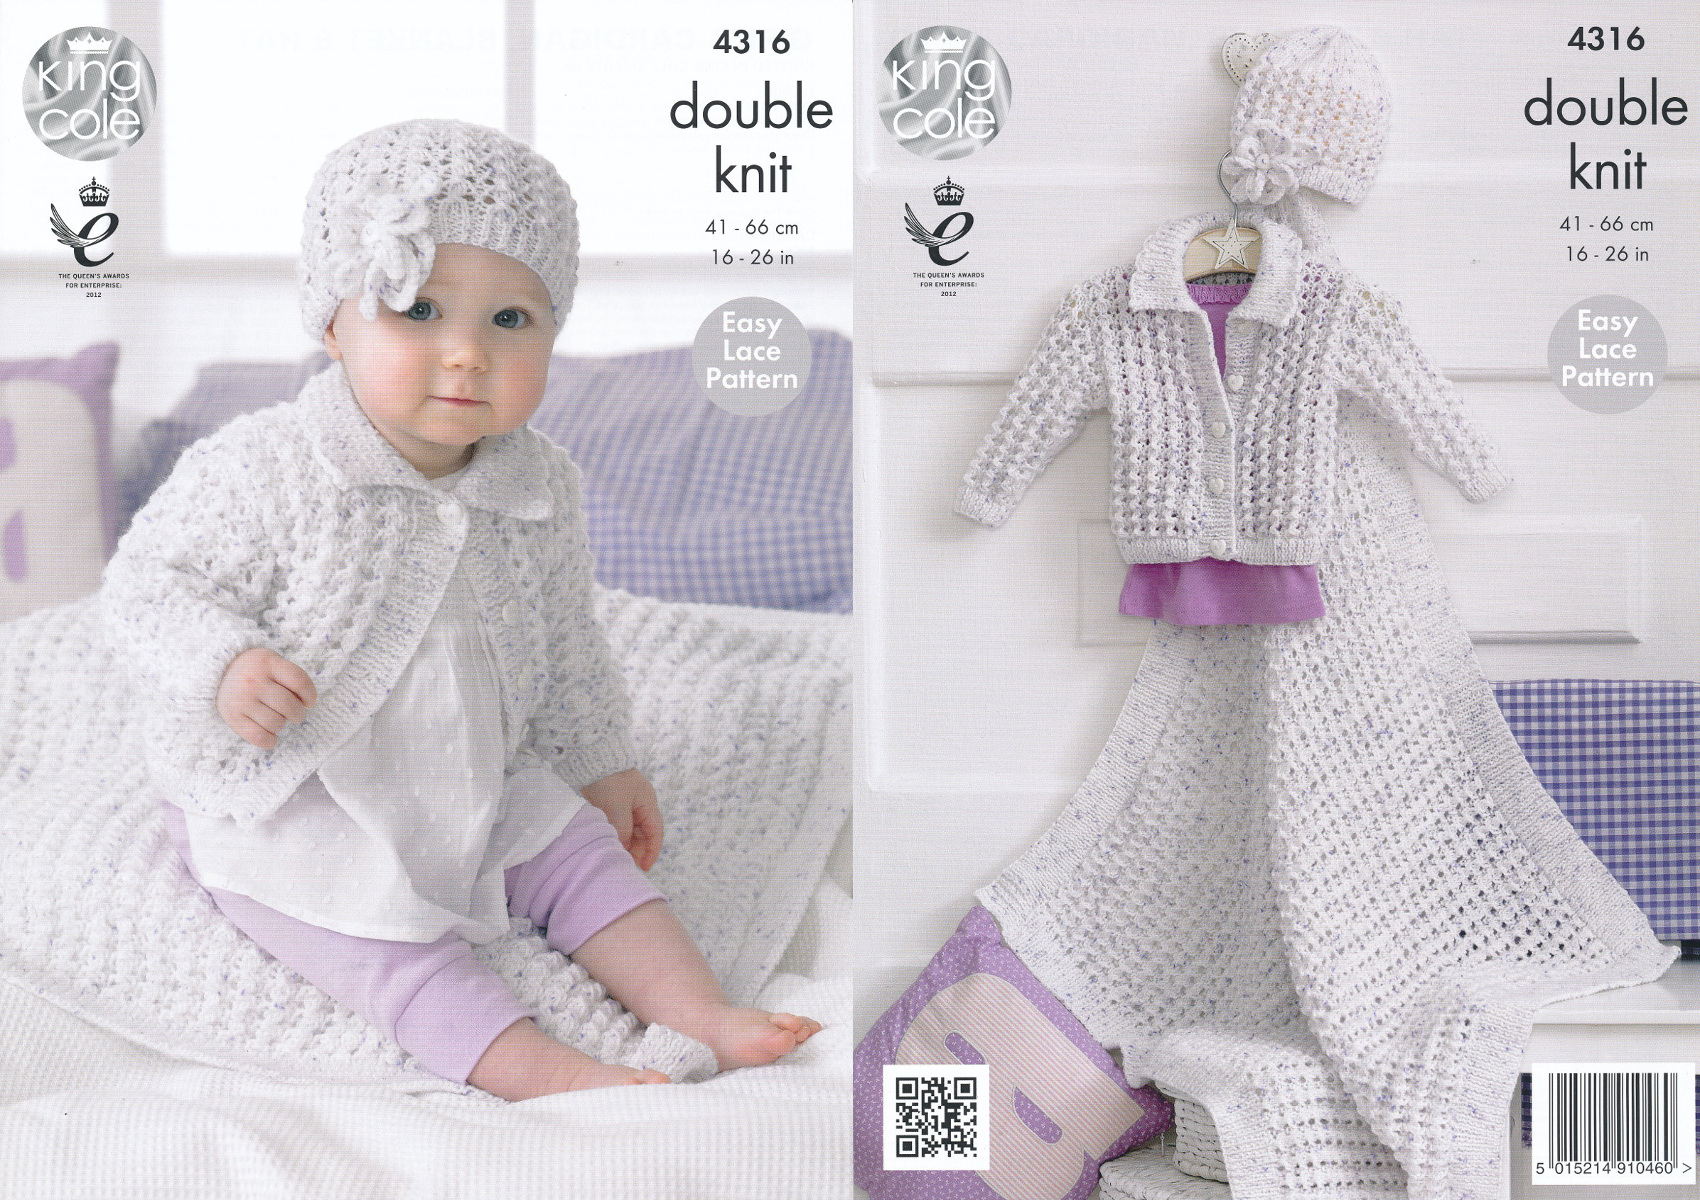 Double Knitting Baby Patterns Details About King Cole Double Knitting Pattern Ba Lace Cardigan Blanket Flower Hat Dk 4316